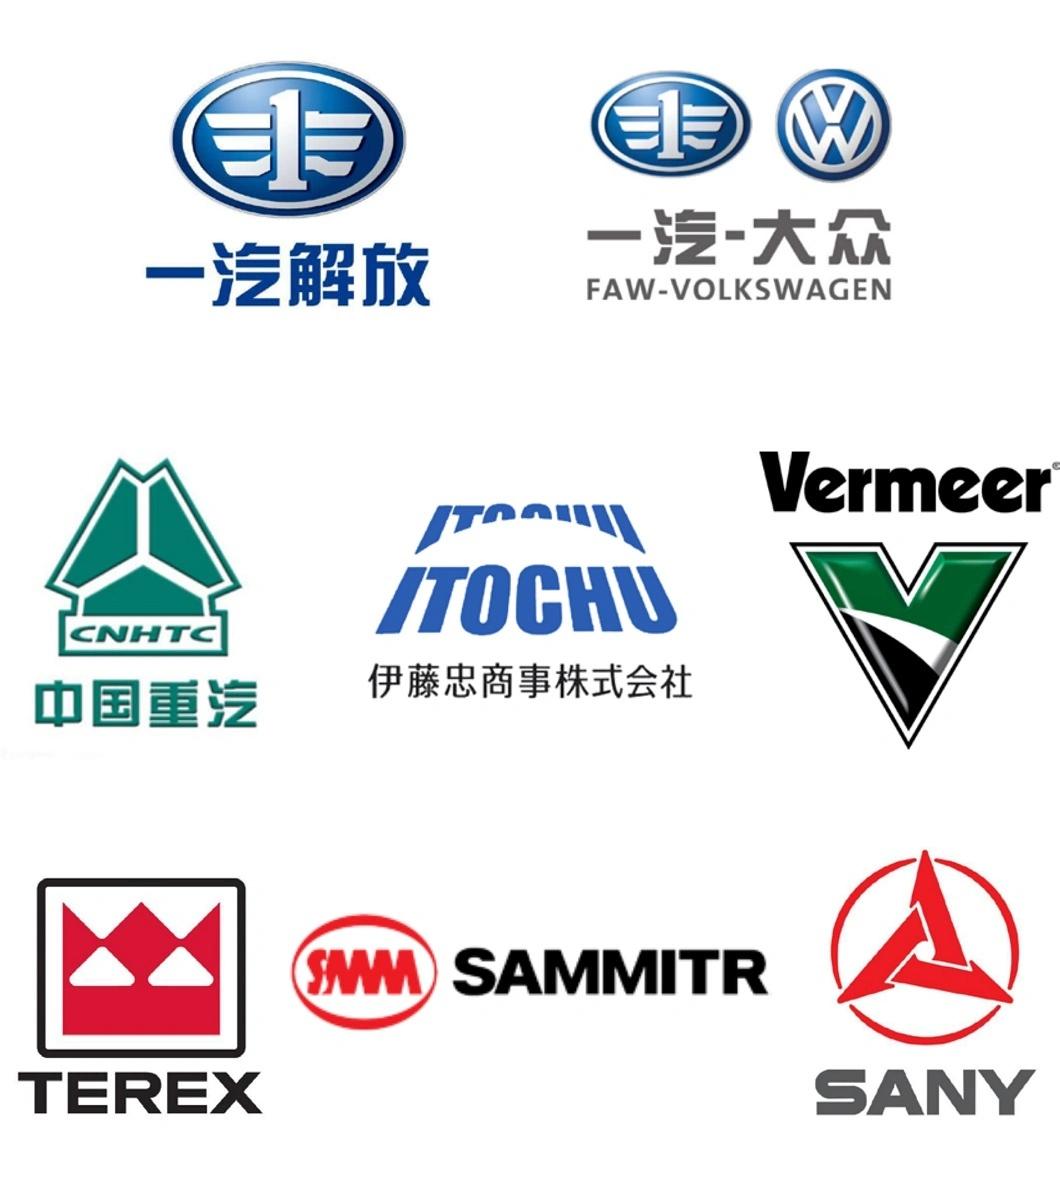 Truck Leaf Spring Seat OEM and ODM Machinery/Auto/Forklift/Motor/Car/Valve/Trailer/Truck Accessories/Spare Parts in Investment/Lost Wax/Precision Casting/Adi